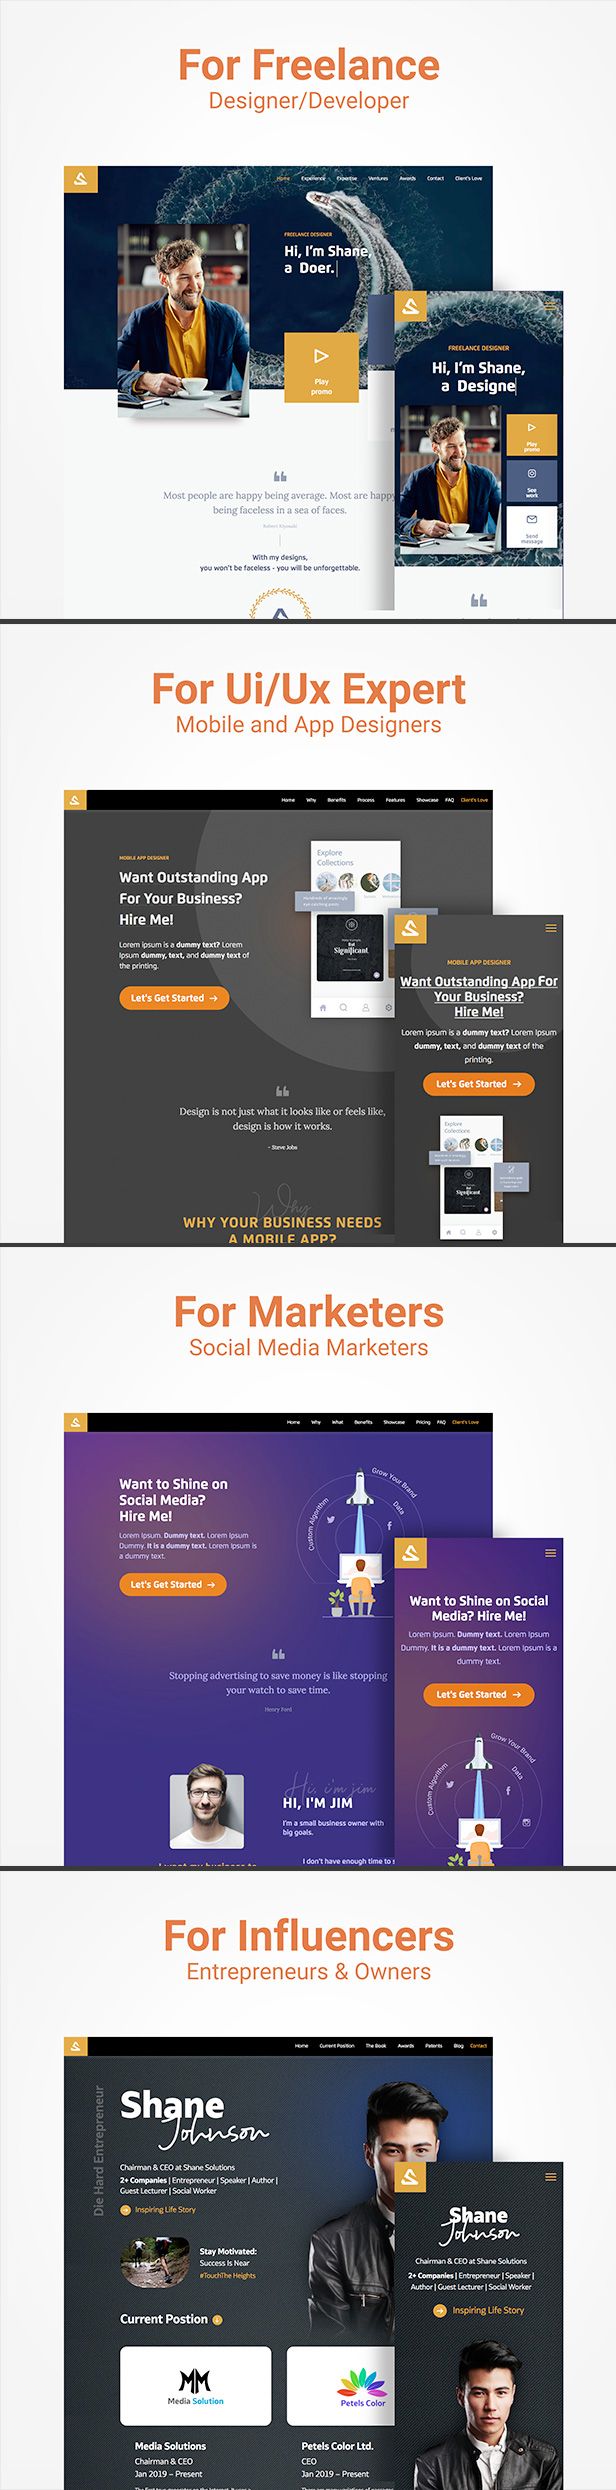 The Character - One Pager Templates for Professionals in HTML 5 - 1